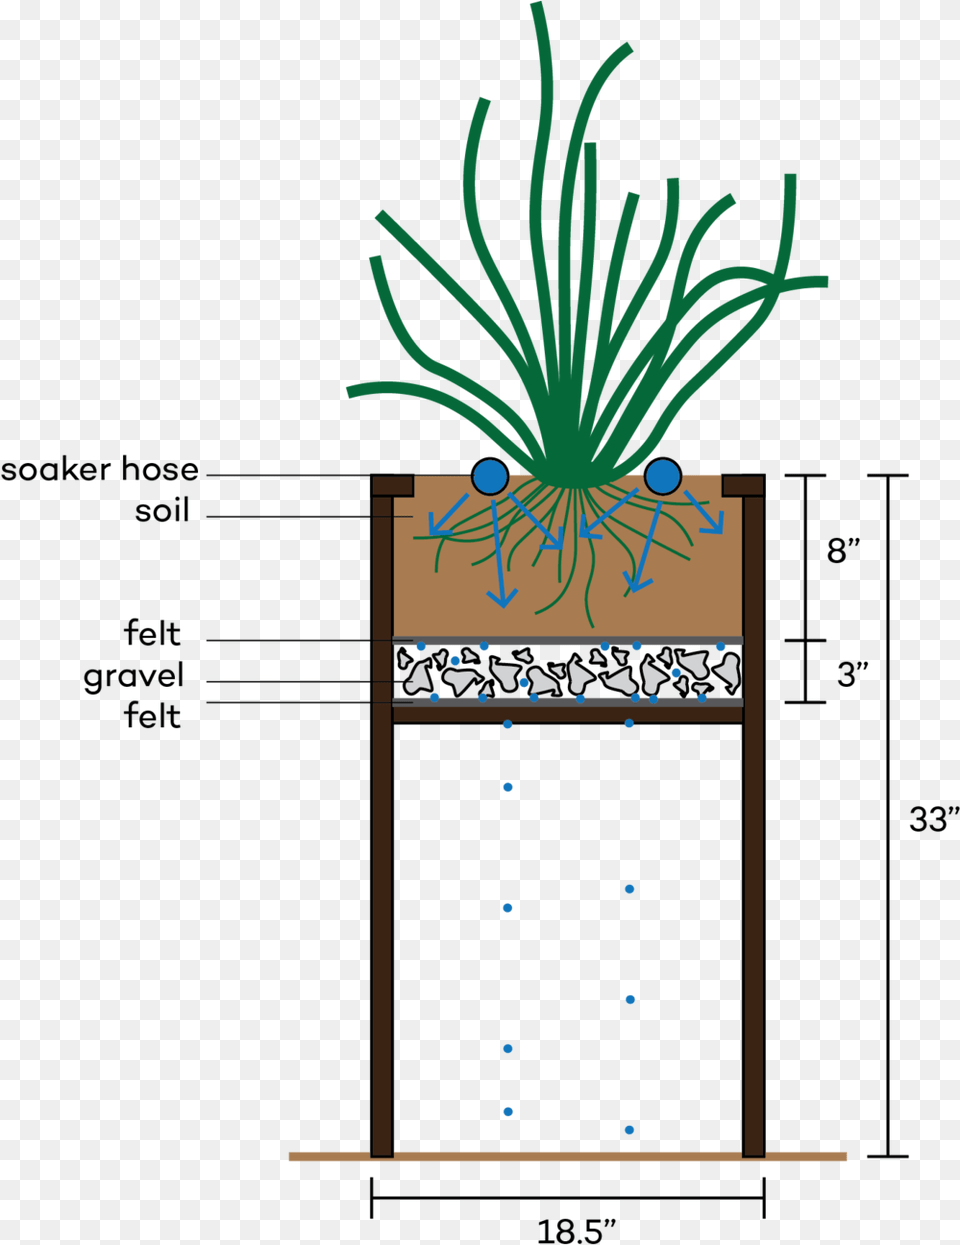 Diagram Of Enable39s Self Watering Planters Flowerpot, Plant, Potted Plant, Jar, Planter Png Image